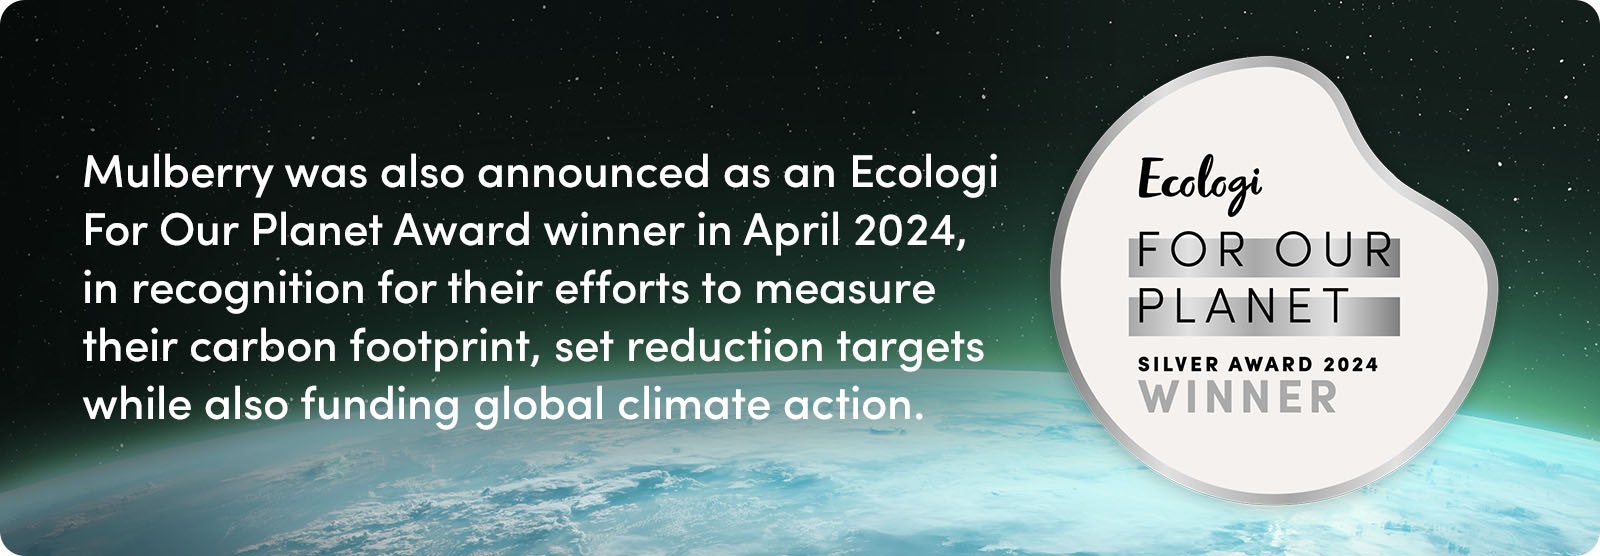 Mulberry was also announced as an Ecologi For Our Planet Award winner in April 2024, in recognition for their efforts to measure their carbon footprint, set reduction targets while also funding global climate action.